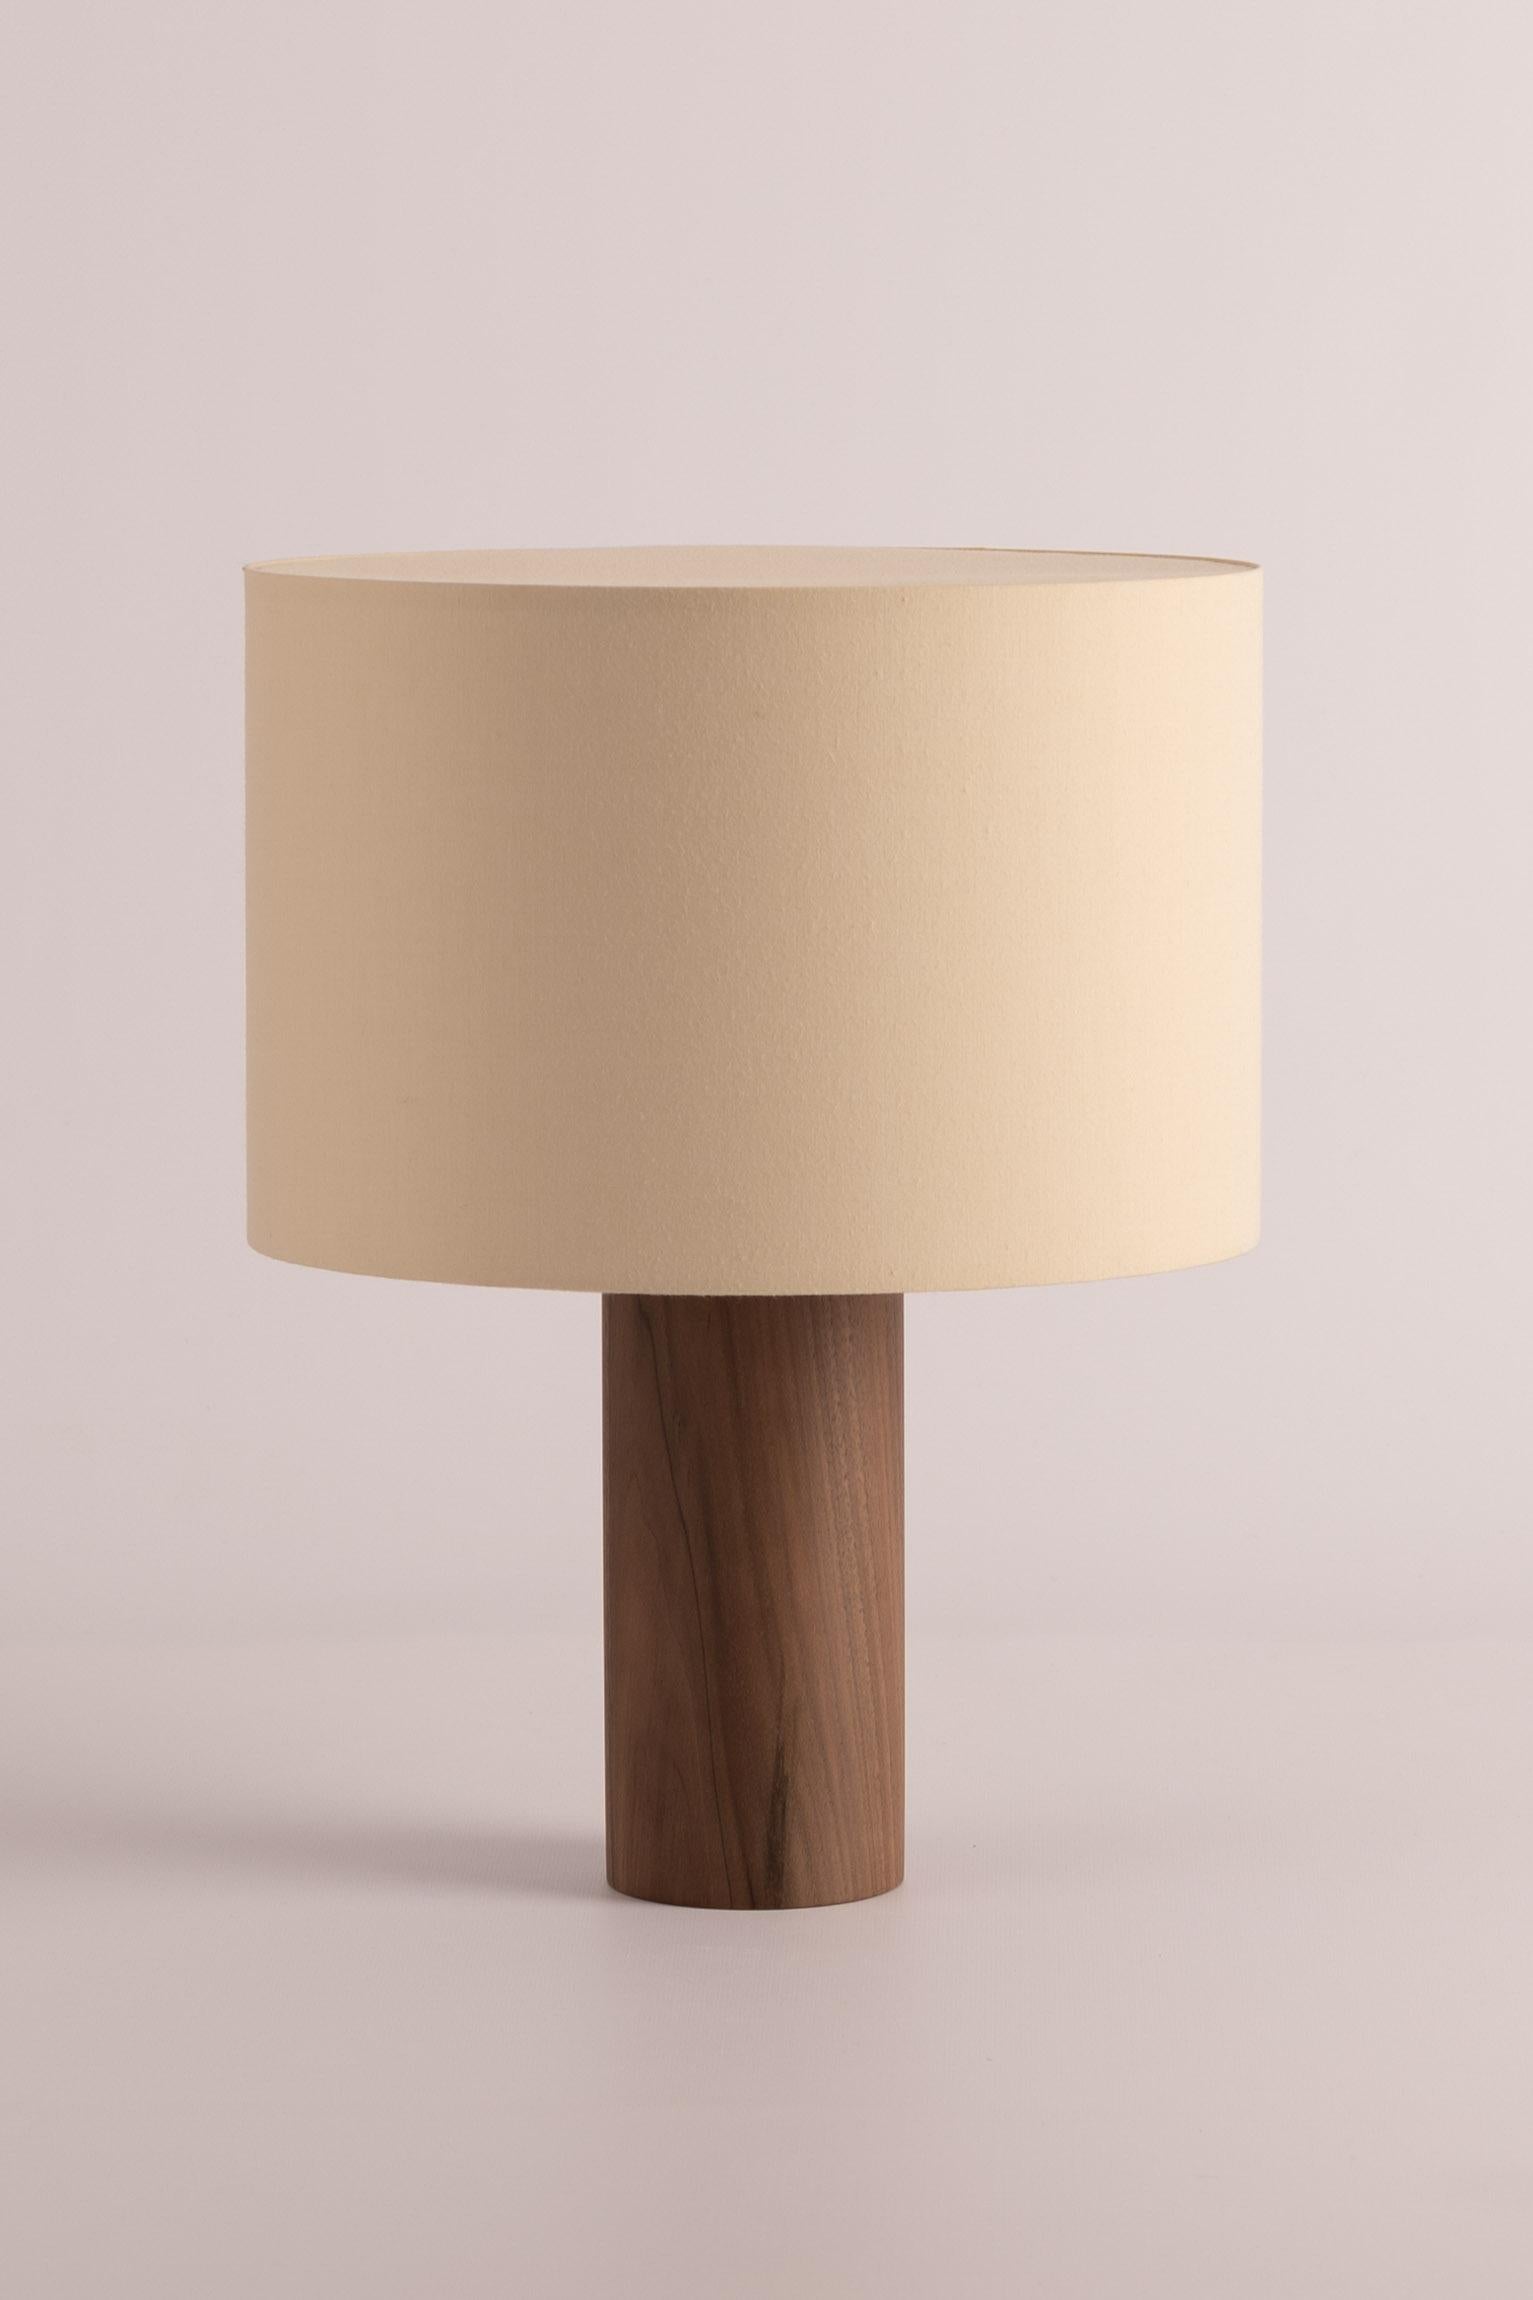 Walnut Pipito Table Lamp by Simone & Marcel
Dimensions: Ø 30 x H 40 cm.
Materials: Cotton and walnut.

Also available in different marble and wood options and finishes. Custom options available on request. Please contact us. 

All our lamps can be